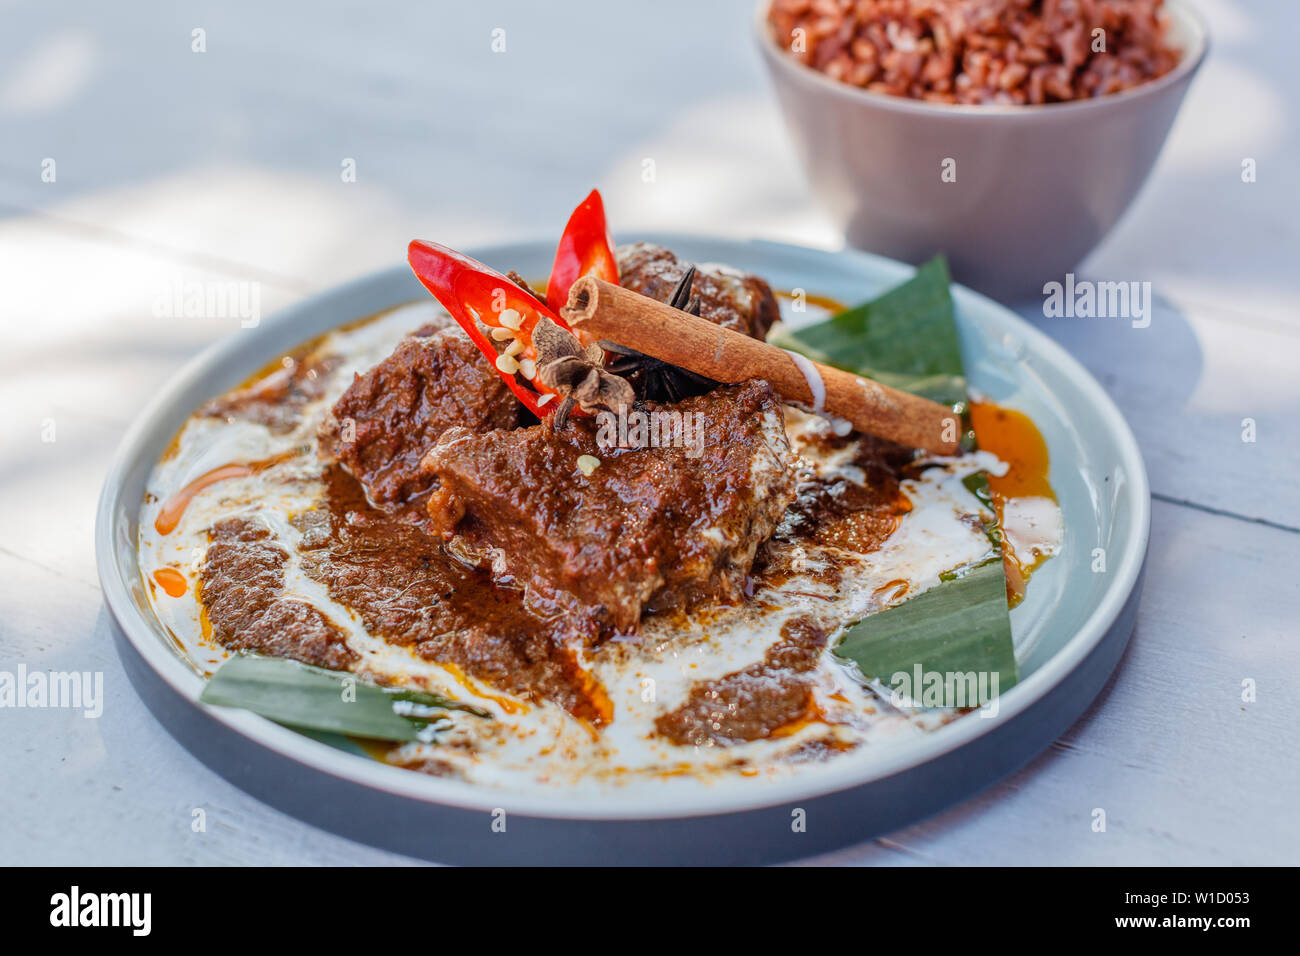 Beef Rendang on a plate with banana leaf, decorated with red chili and cinnamon stick. Served with nasi merah, steamed red rice. Indonesian cuisine. Stock Photo